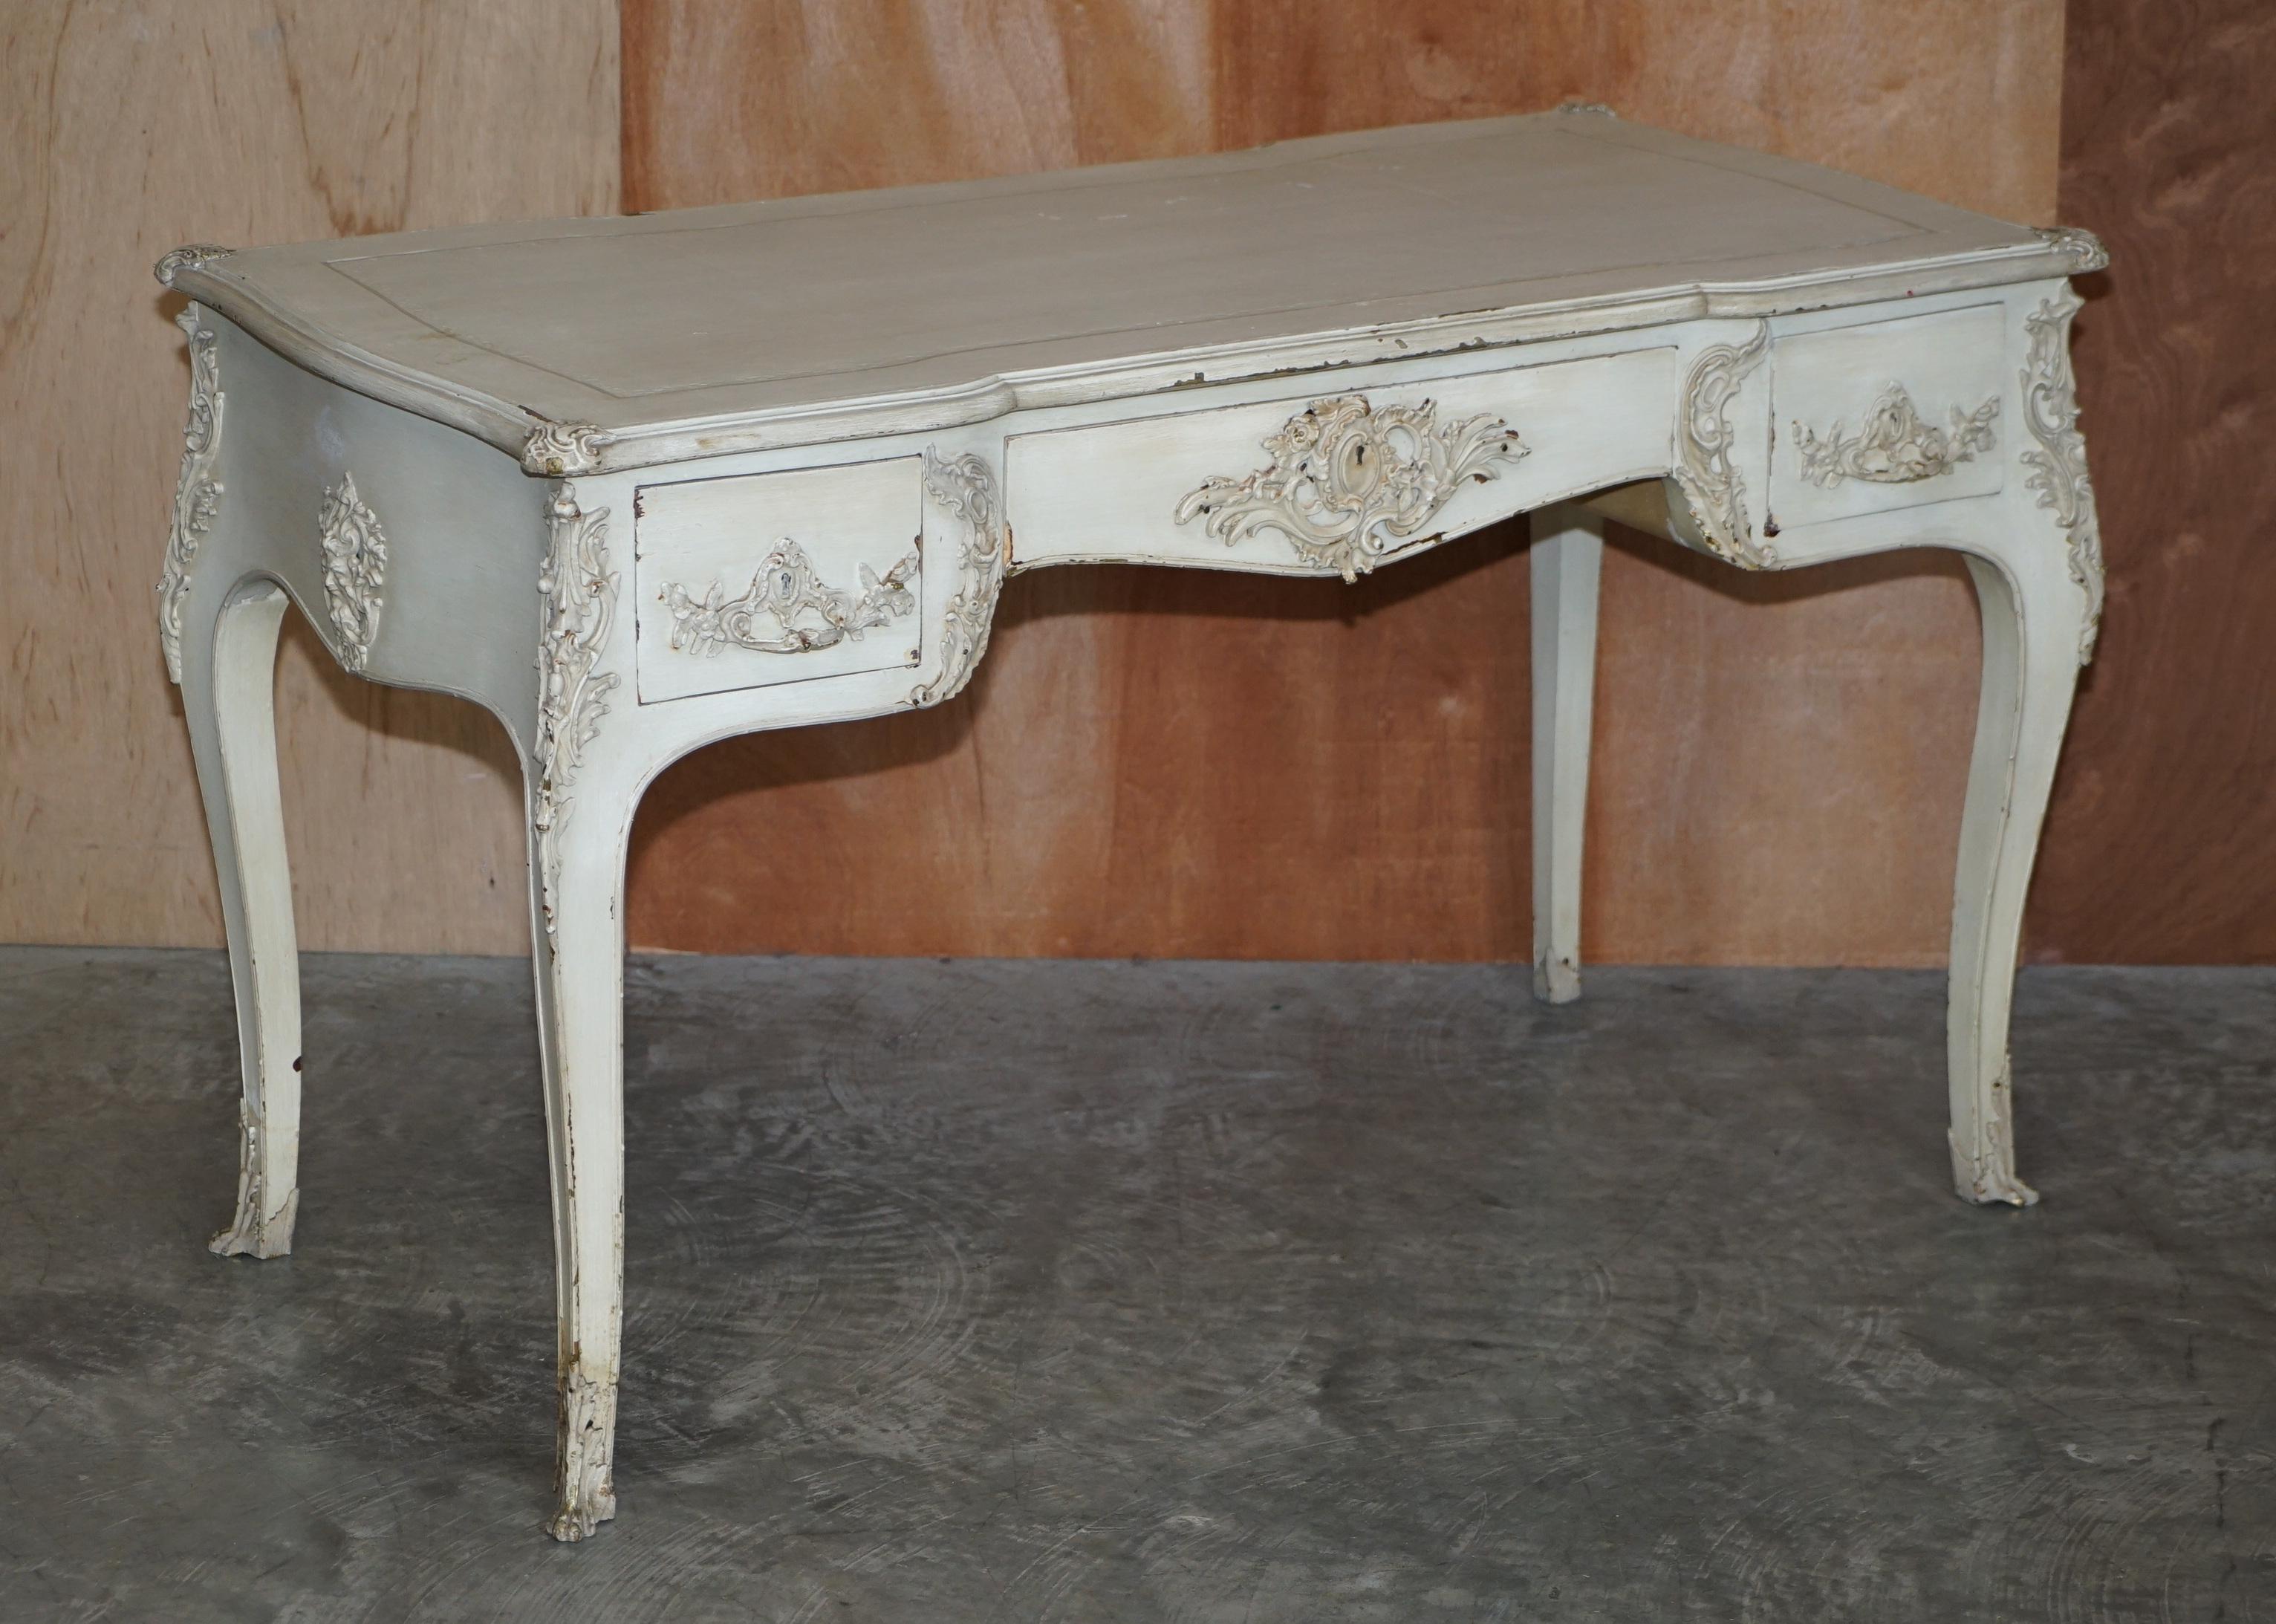 We are delighted to offer for sale this stunning early painted circa 1880-1900 French Louis XV style Bureau plat writing table with later stool

This is a wonderful find, the bureau plat is a proper late 19th century example in solid mahogany, it